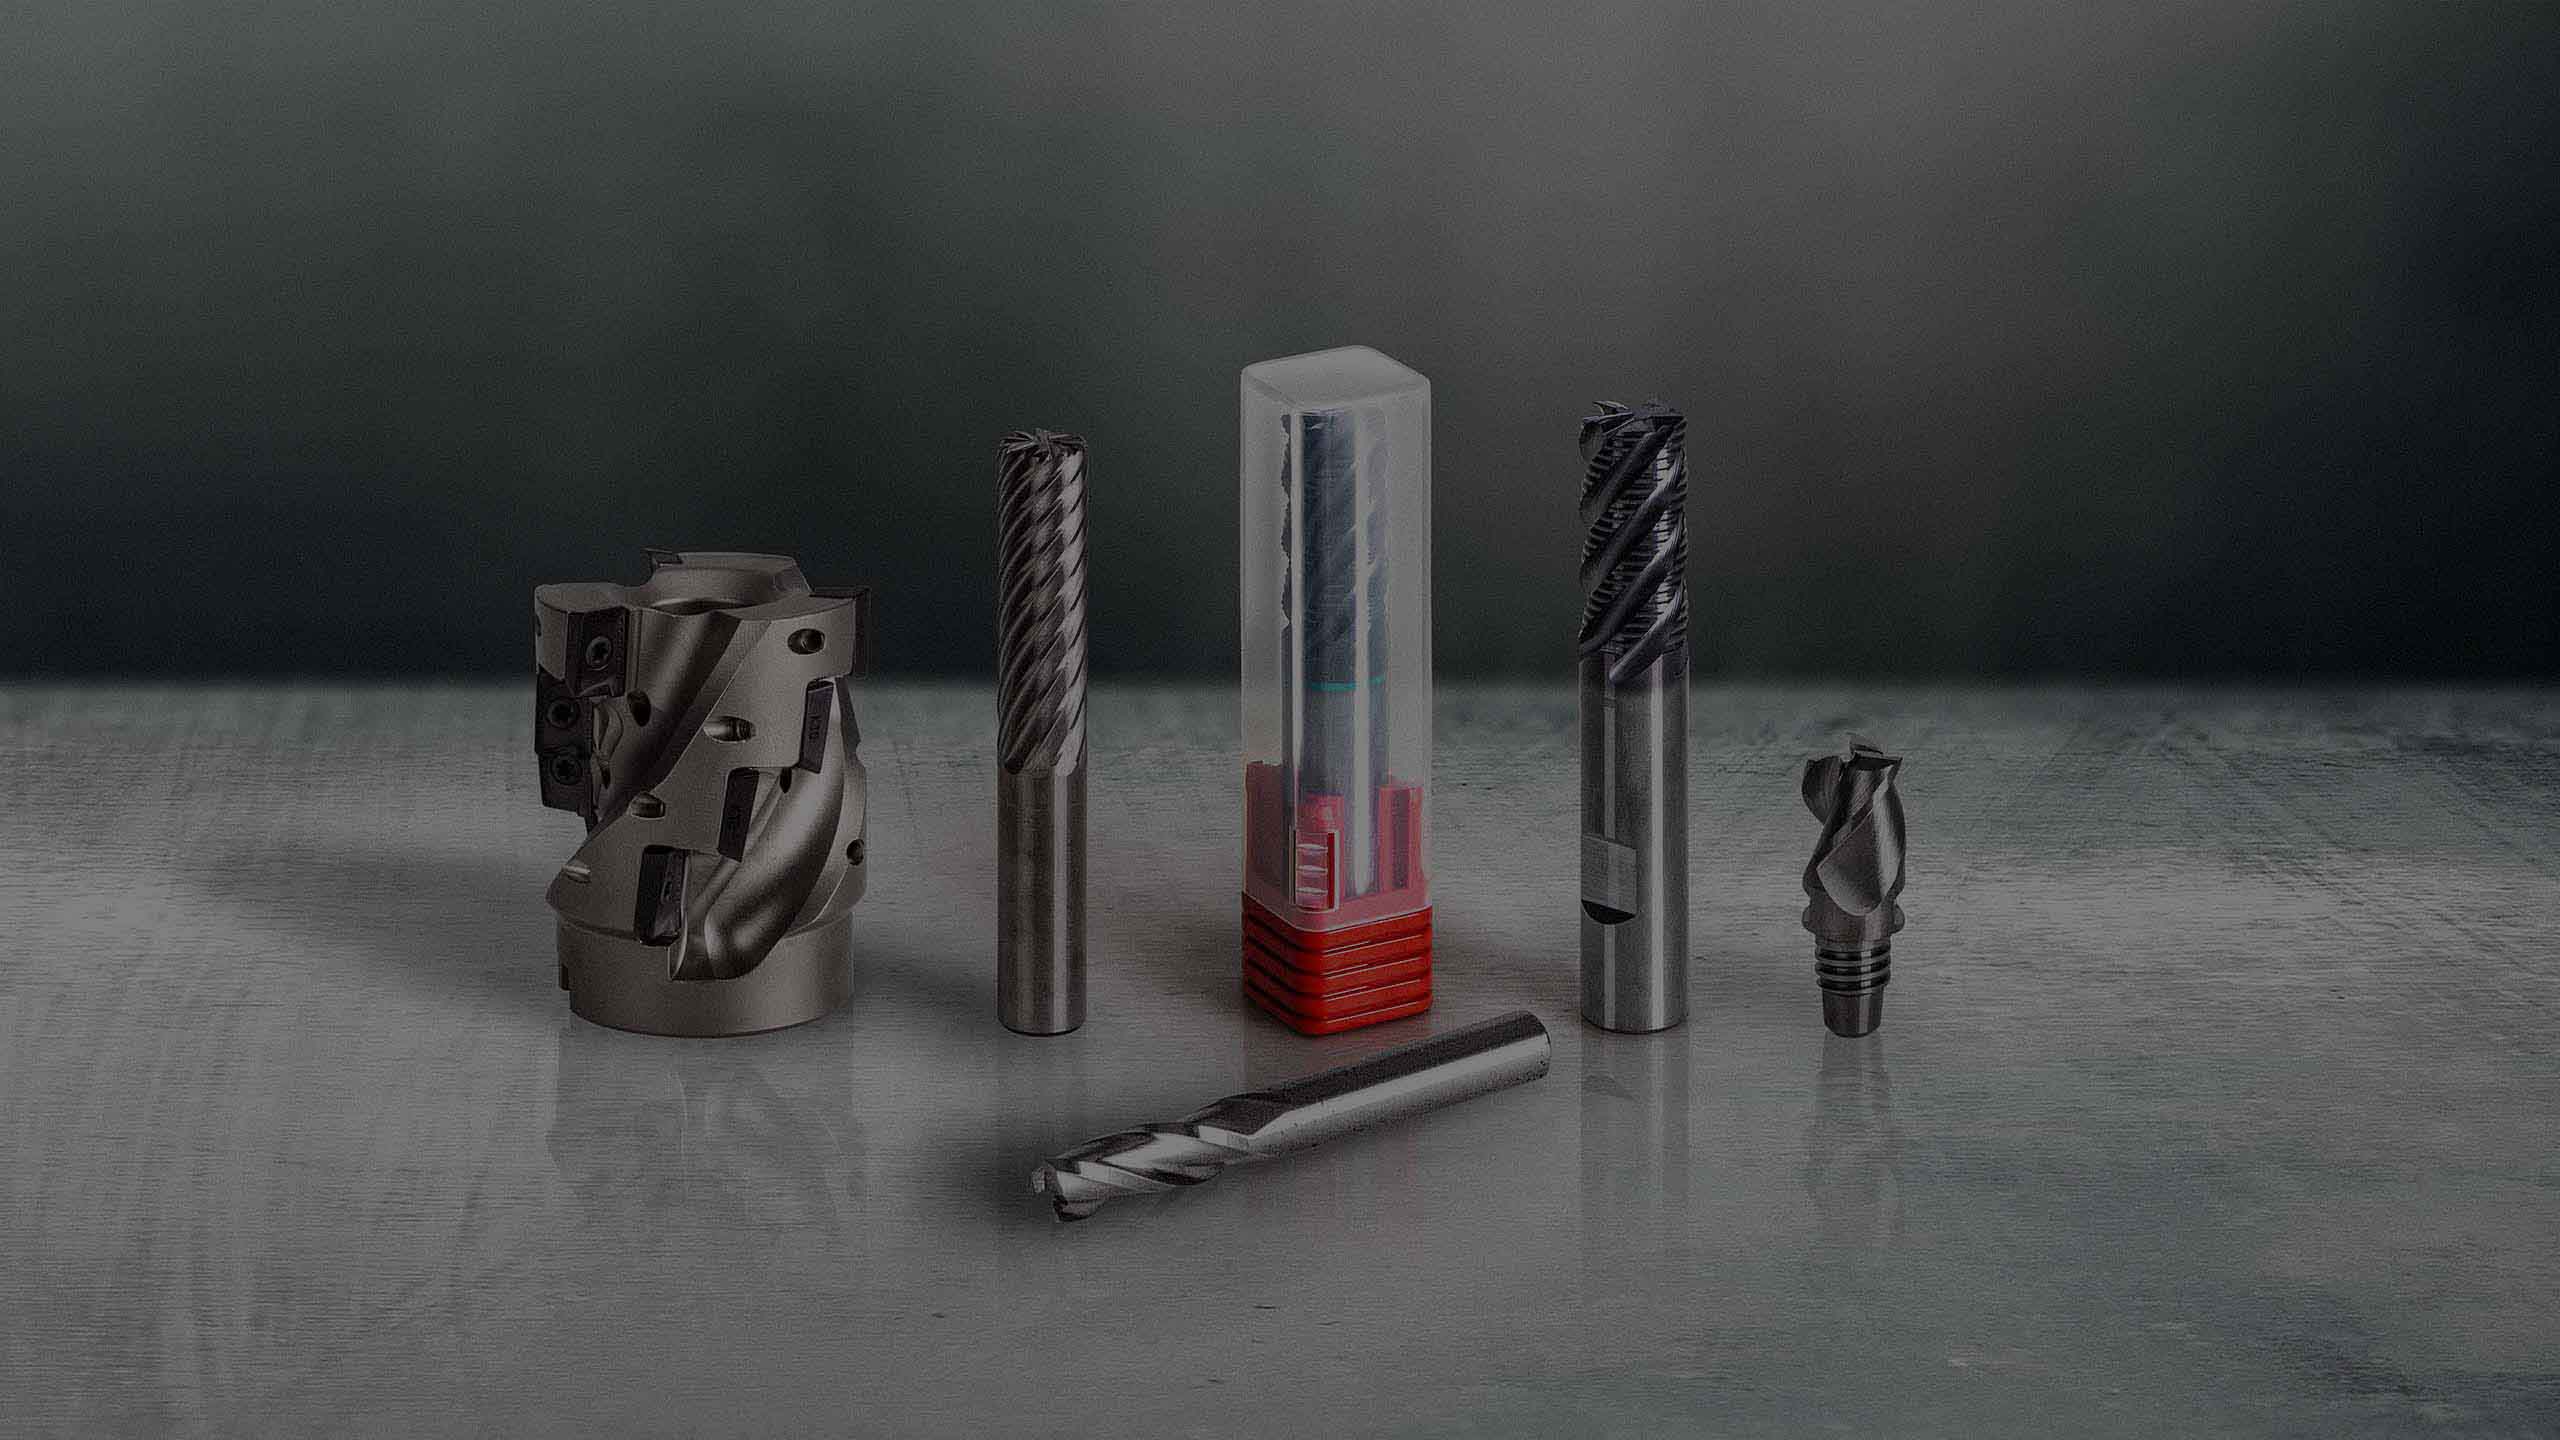 Plastic packaging solutions for milling tools.